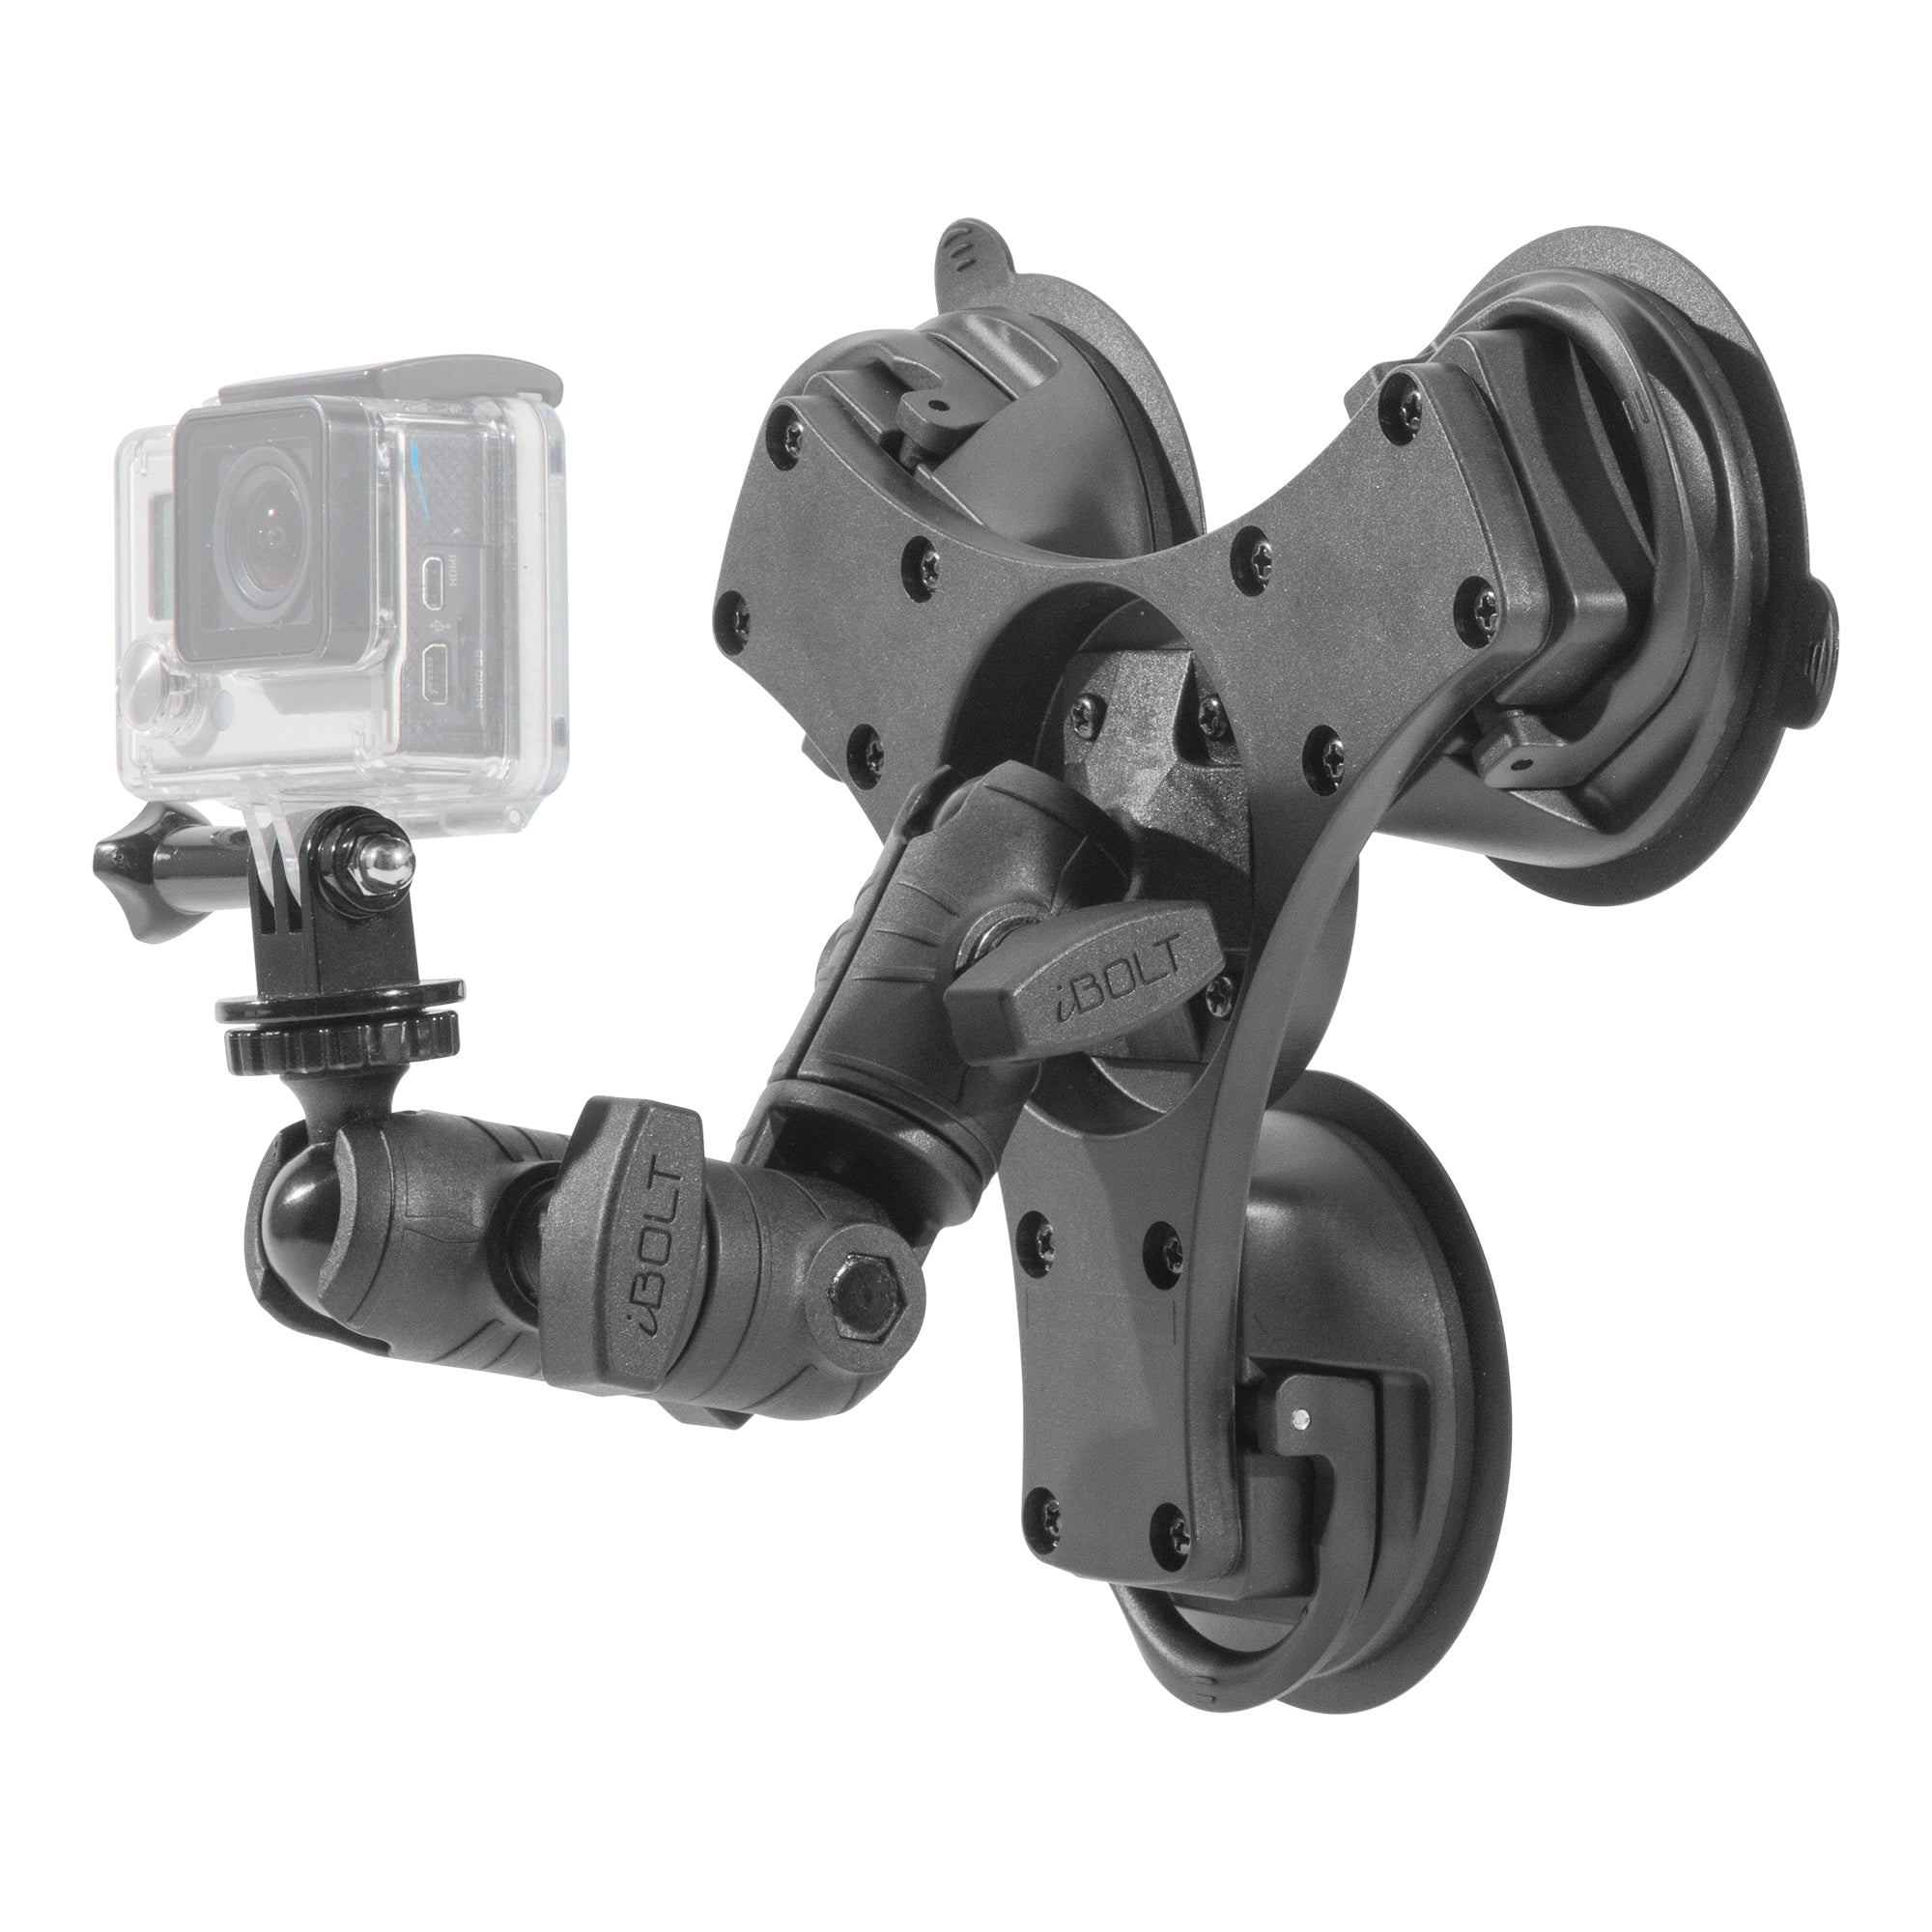 iBOLT Action Camera IncrediBOLT 360 Heavy Duty Triple Suction Cup Mount